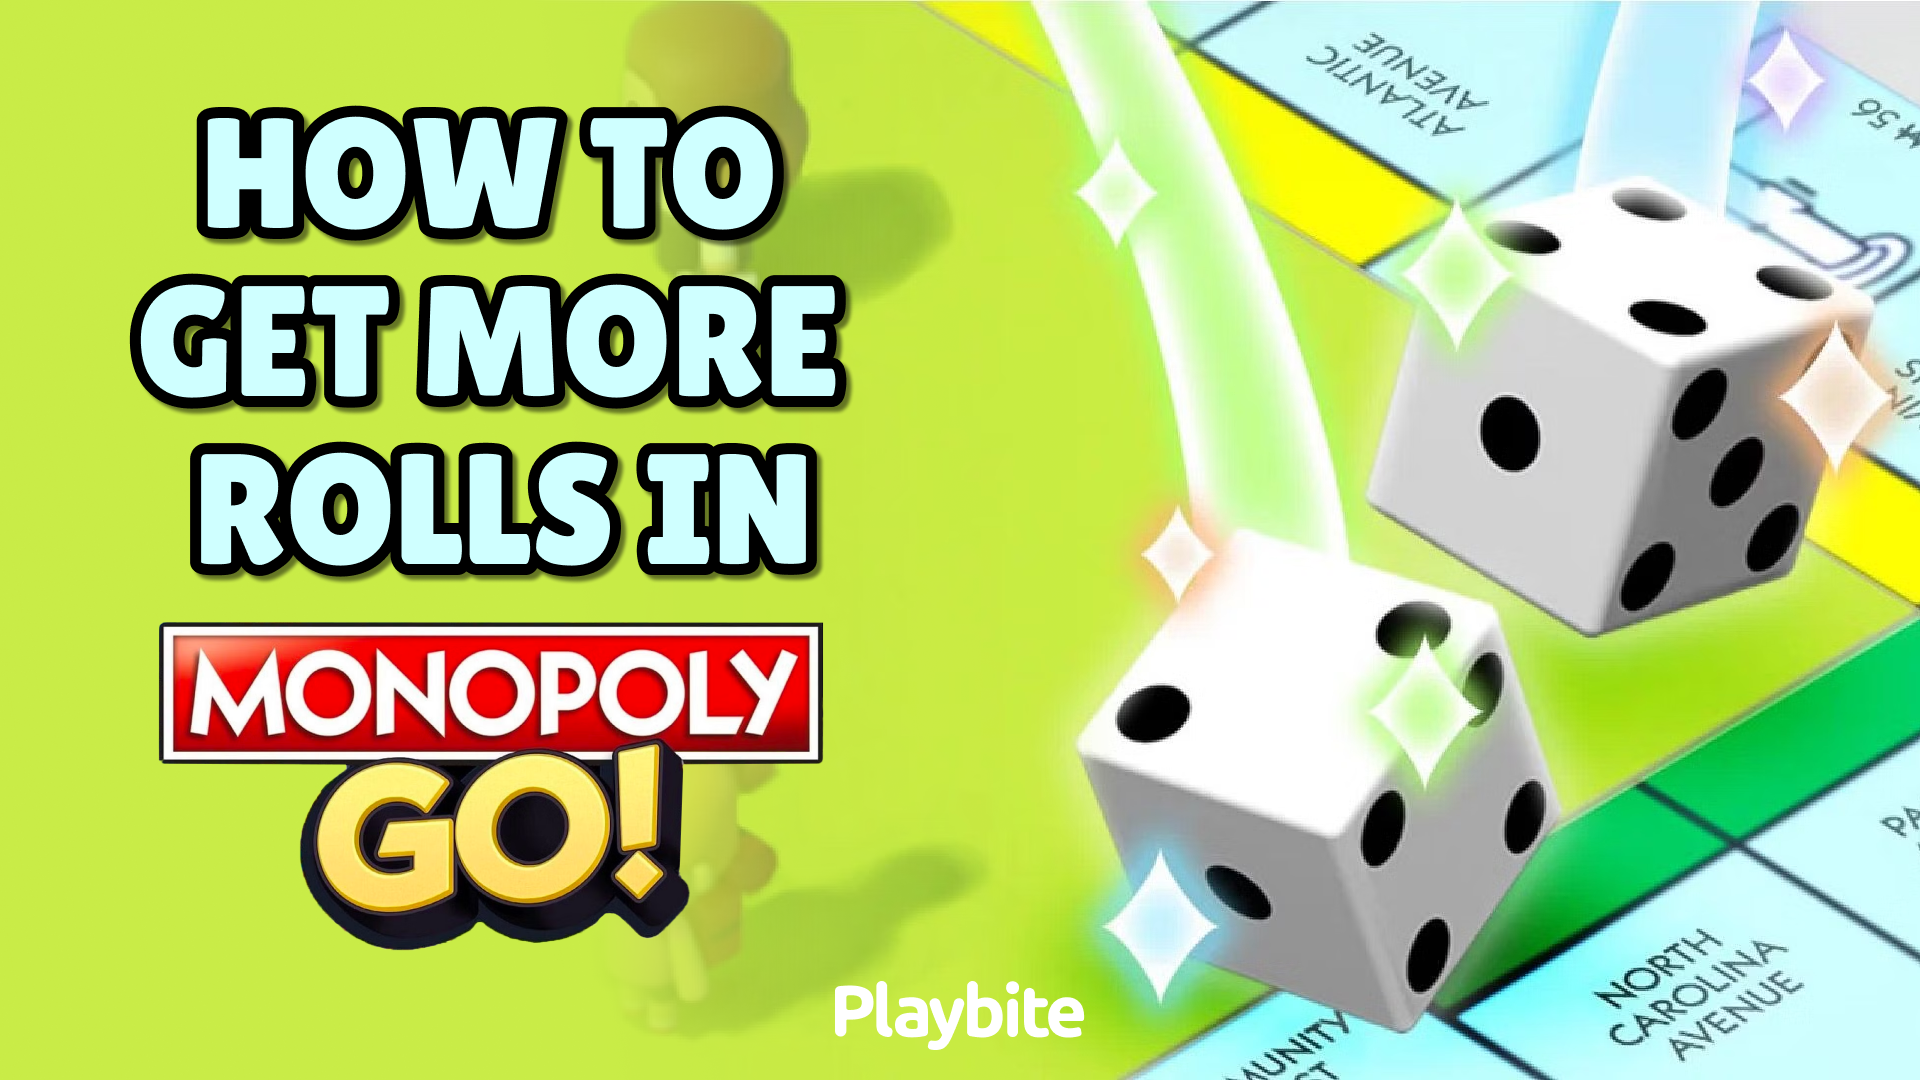 How To Get More Rolls On Monopoly GO!